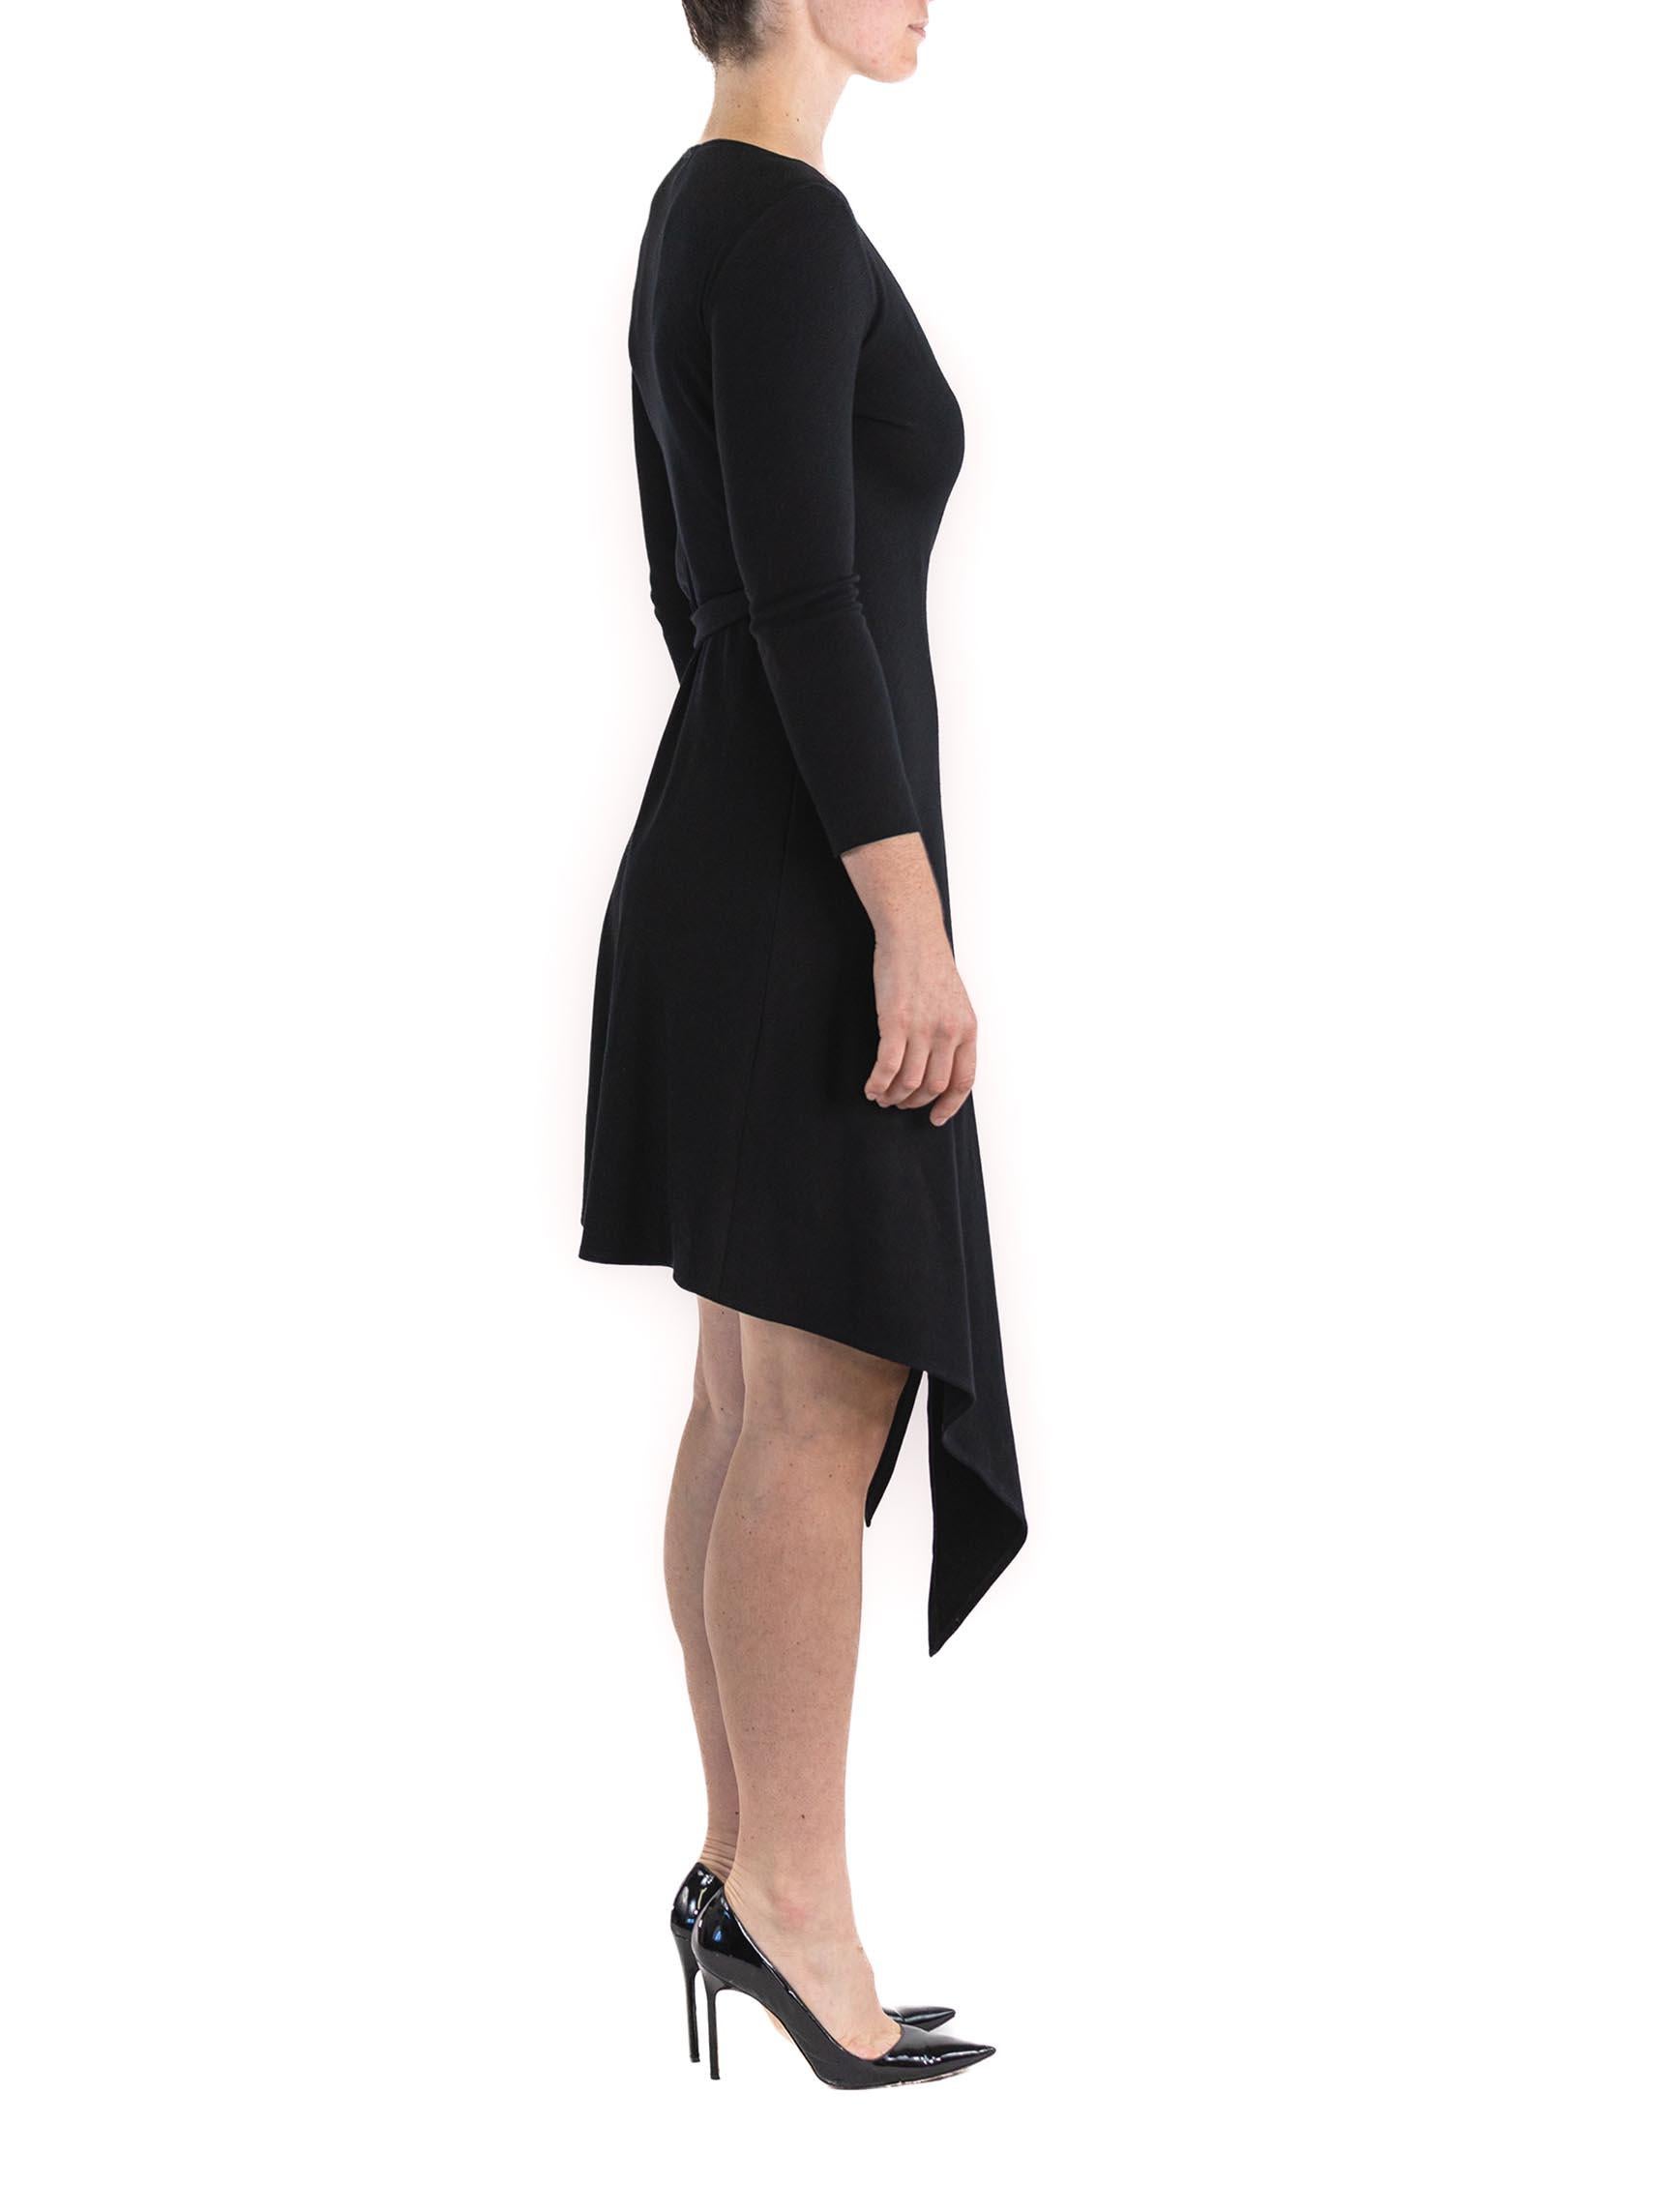 1980S DONNA KARAN Black Wool Knit Belted Wrap Dress In Excellent Condition For Sale In New York, NY